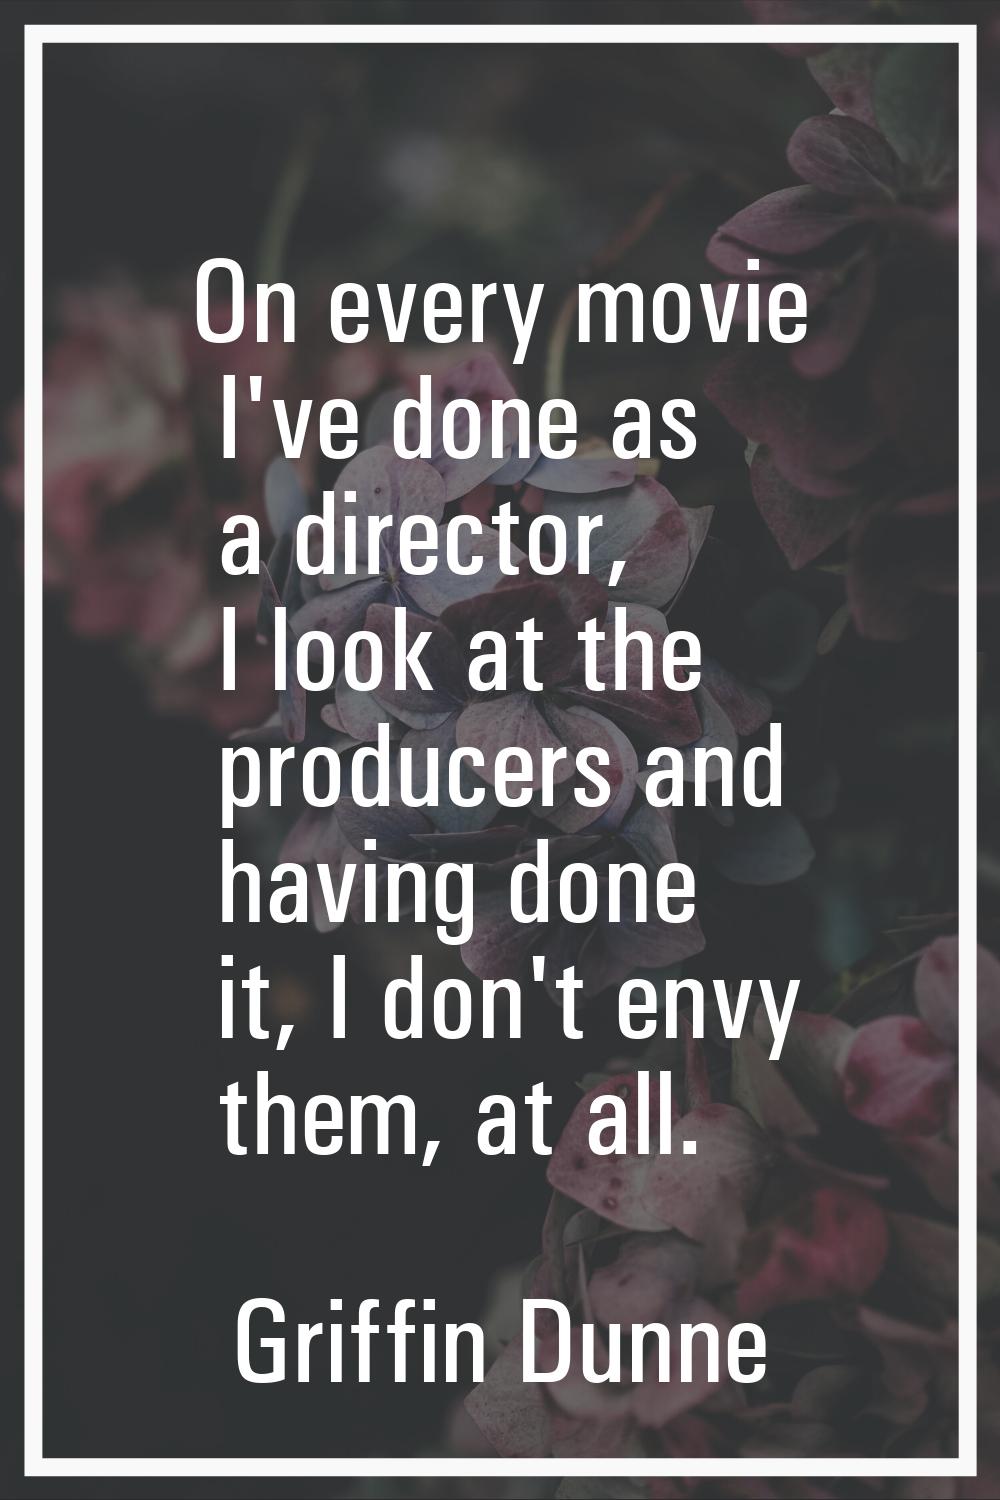 On every movie I've done as a director, I look at the producers and having done it, I don't envy th